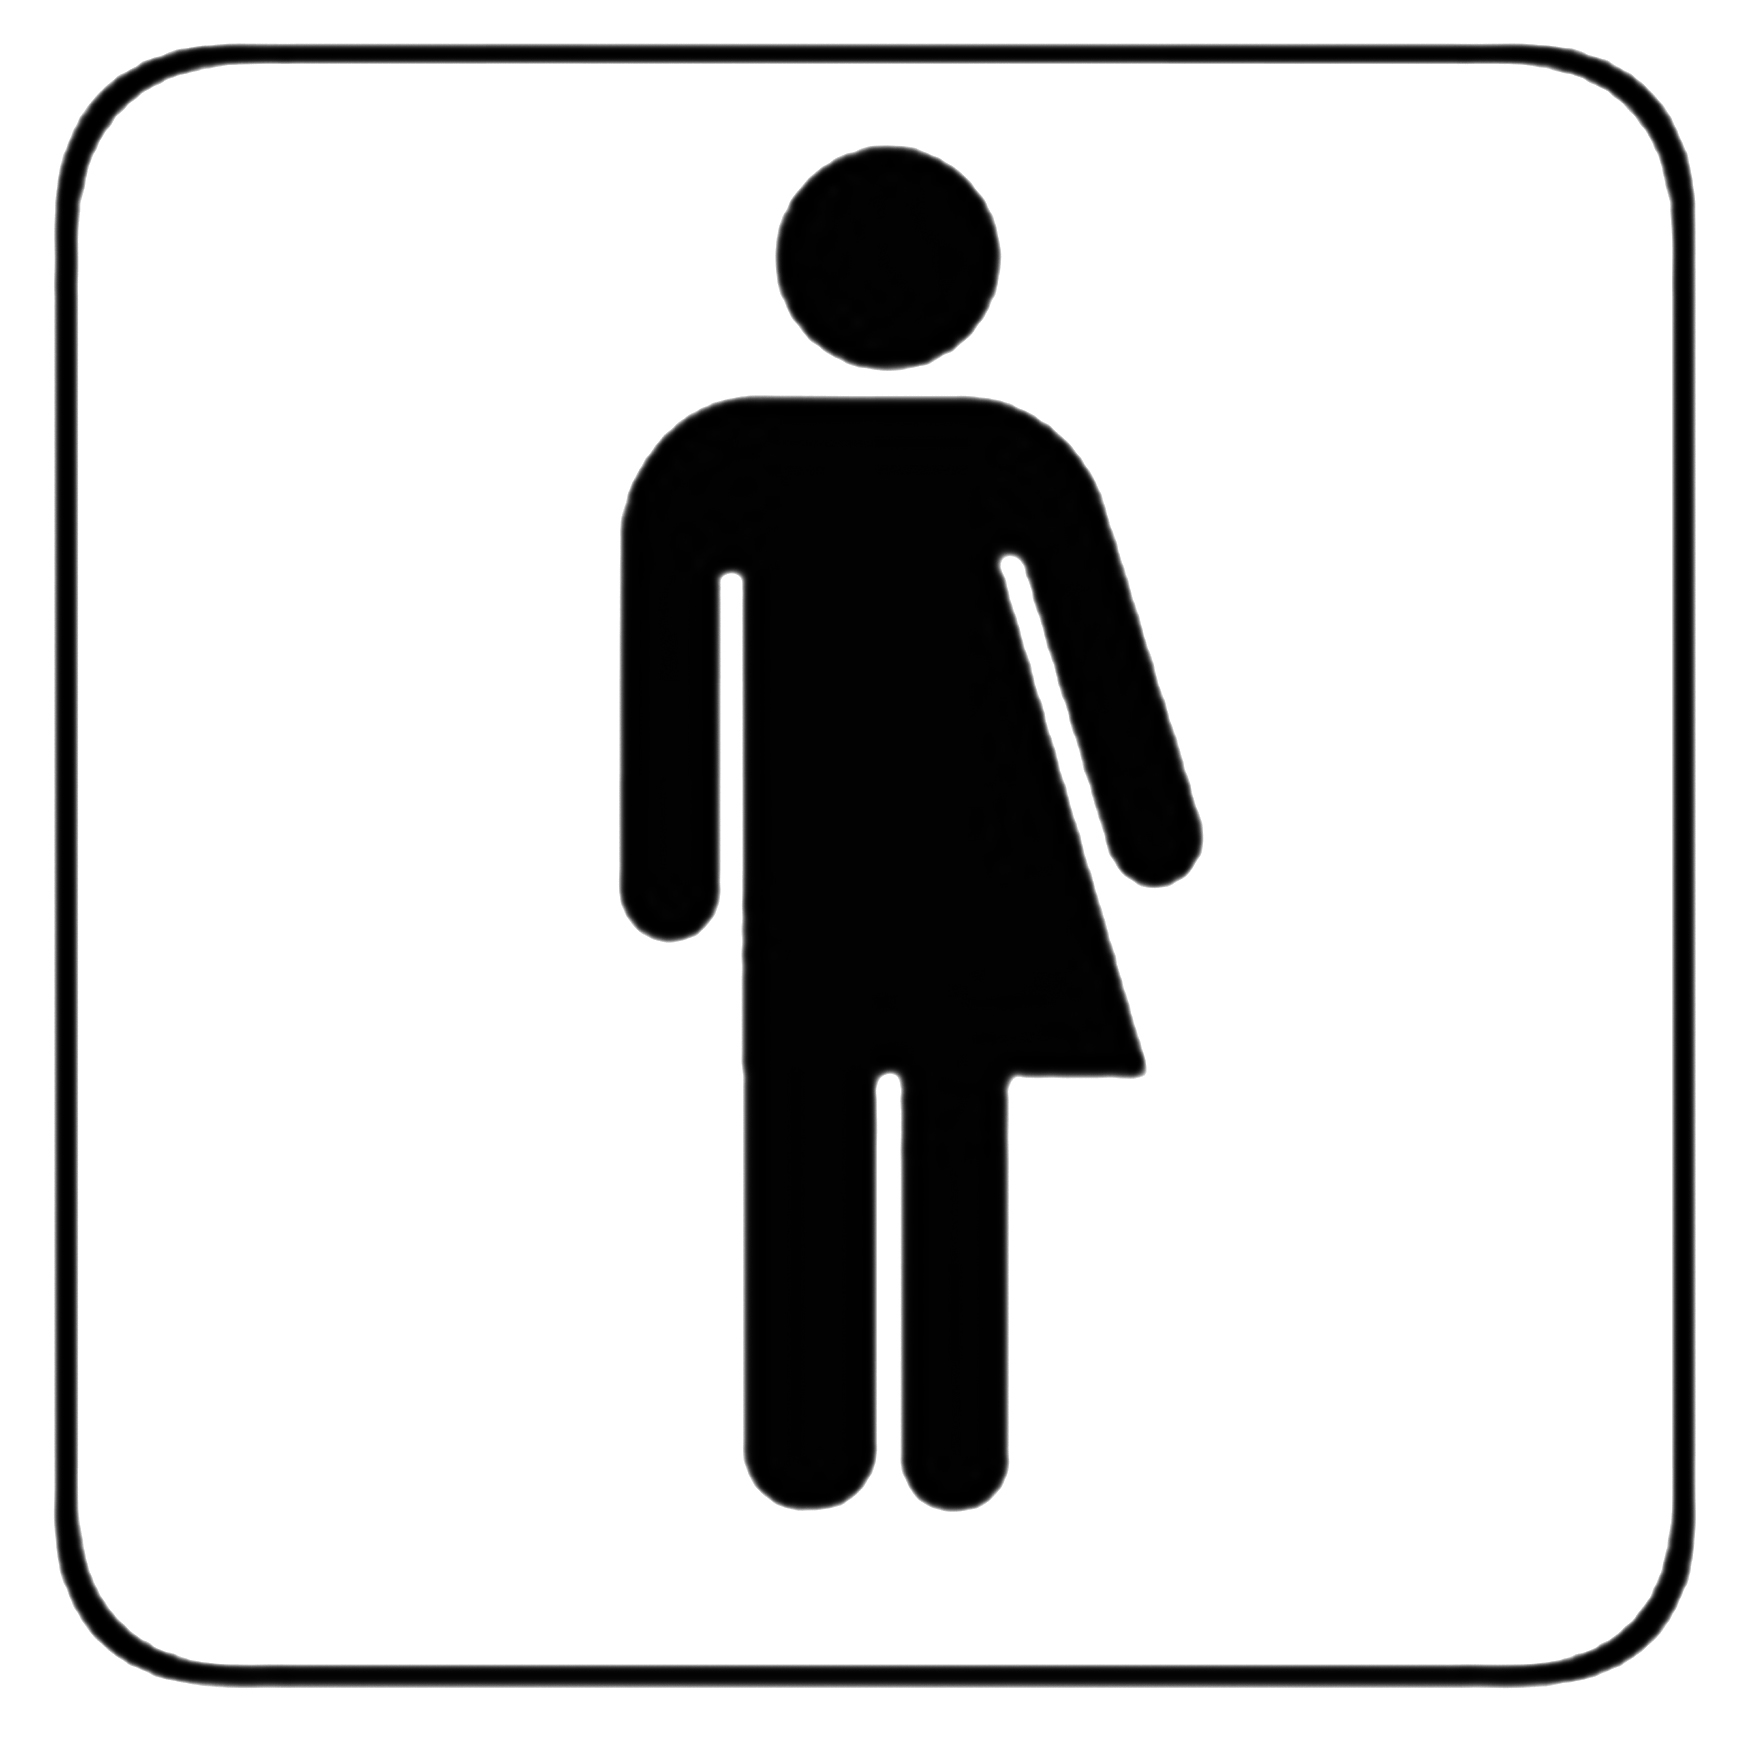 Toilets, Symbols and Toilet signs